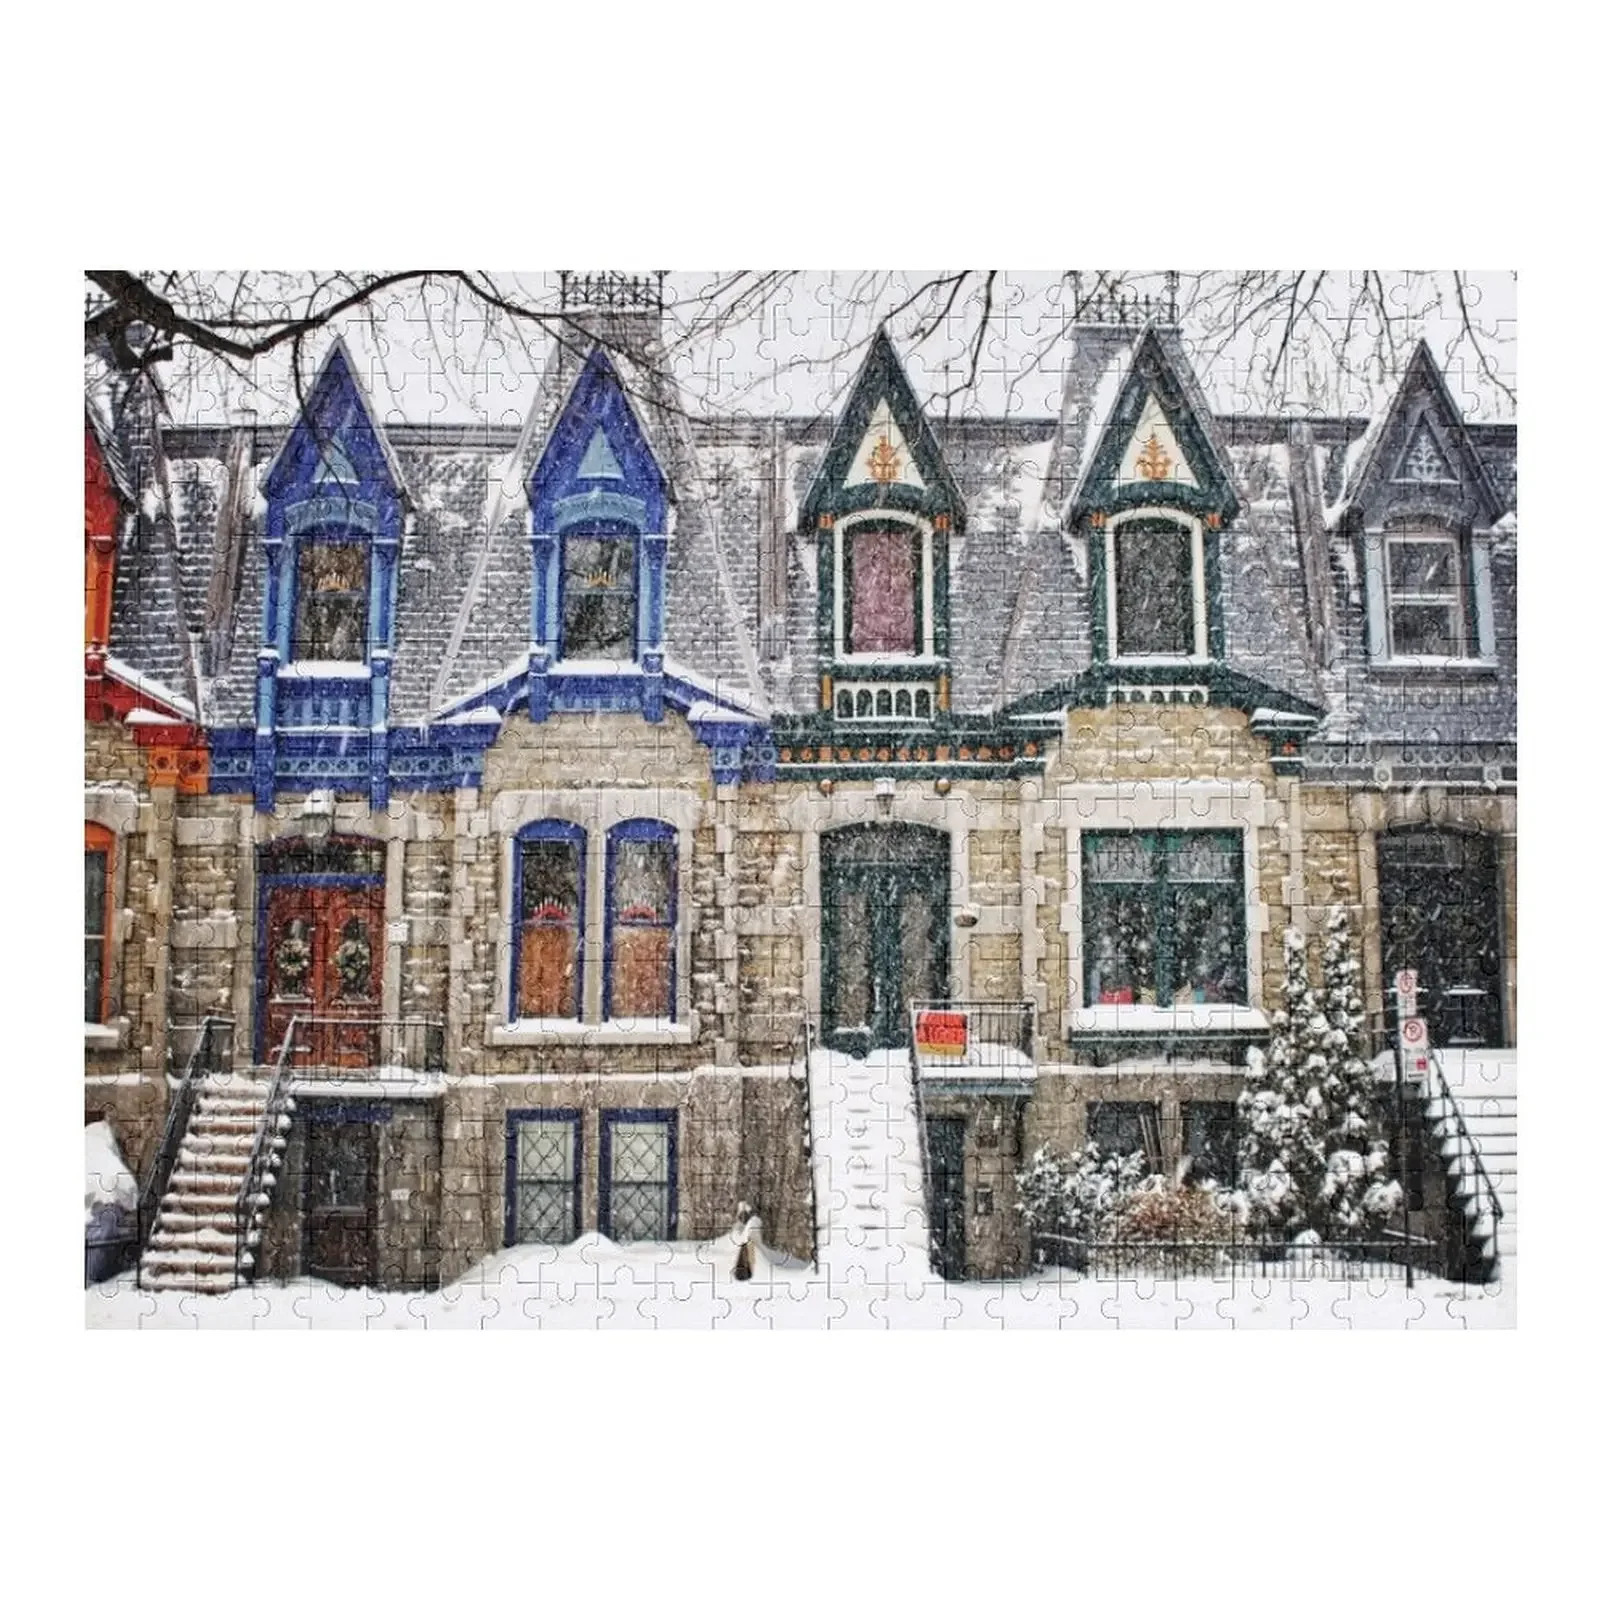 Montreal Victorian Architecture - The Enchanted Winter Jigsaw Puzzle Wooden Boxes Wooden Decor Paintings Puzzle michelangelo the complete paintings sculptures and architecture